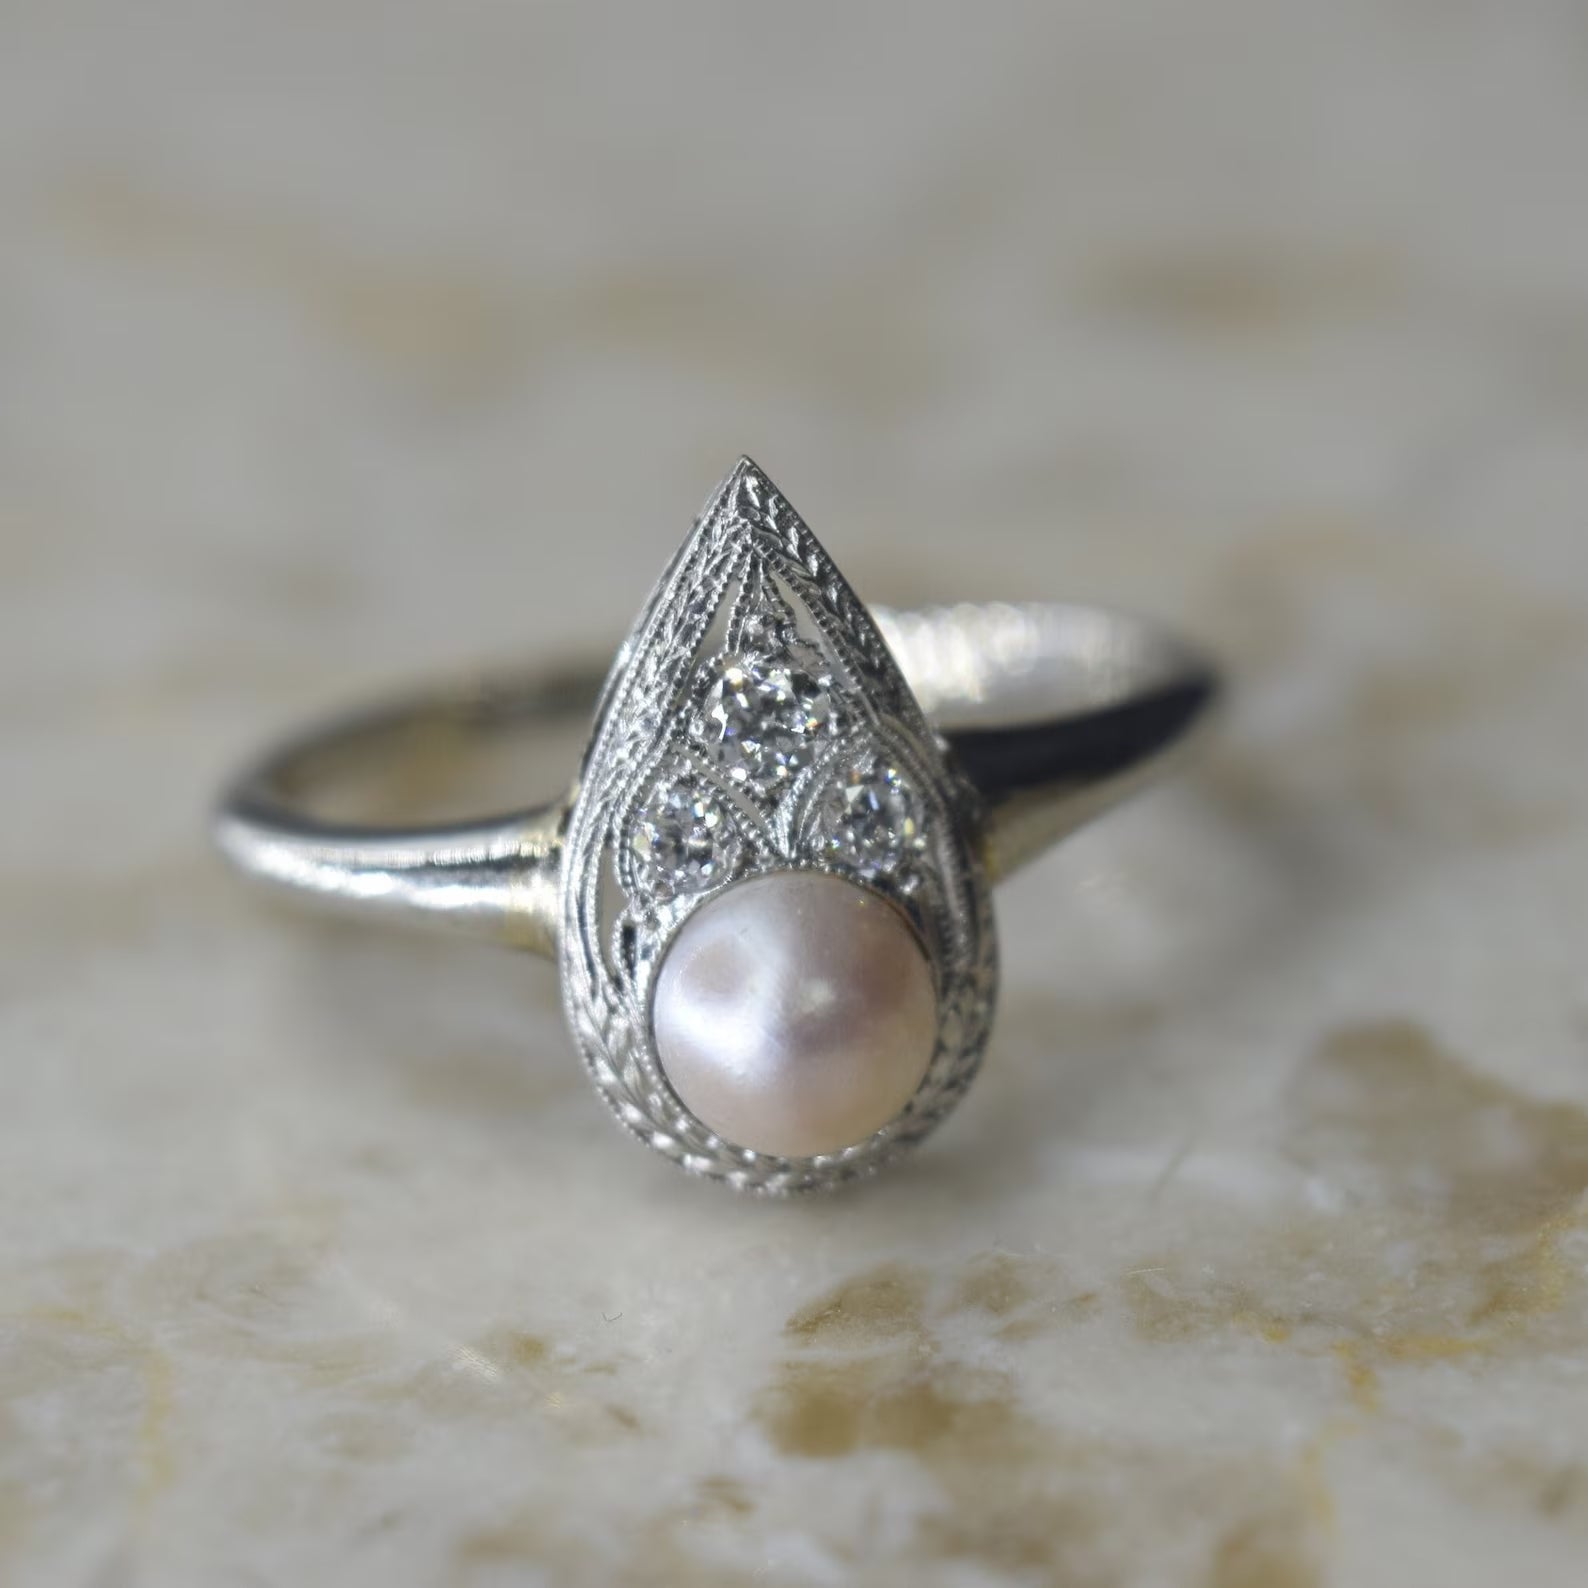 Antique Art Deco 14k White Gold Diamond and Pearl Ring